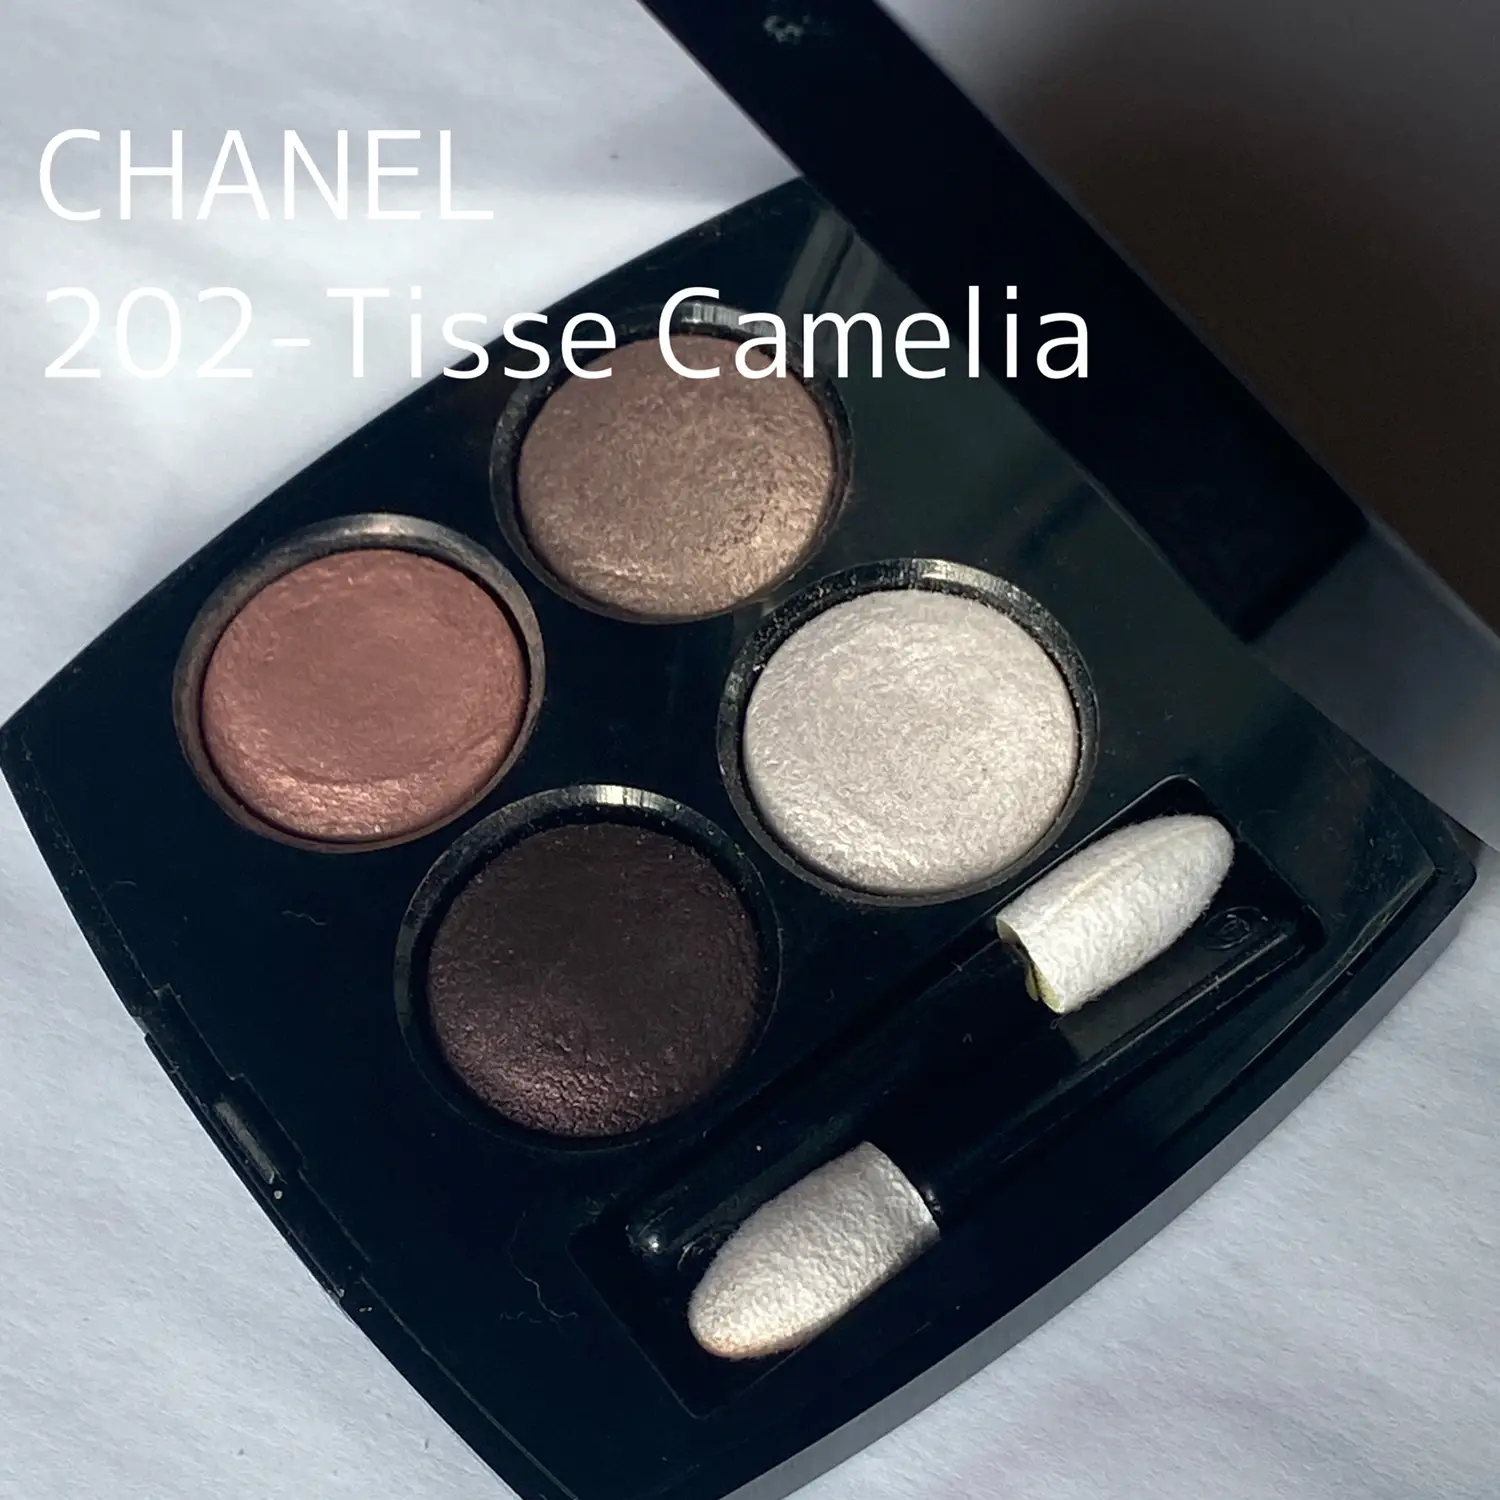 Lecatre Ombre 202 - transparency makeup with Tisse Camelia✨, Gallery  posted by Chloe